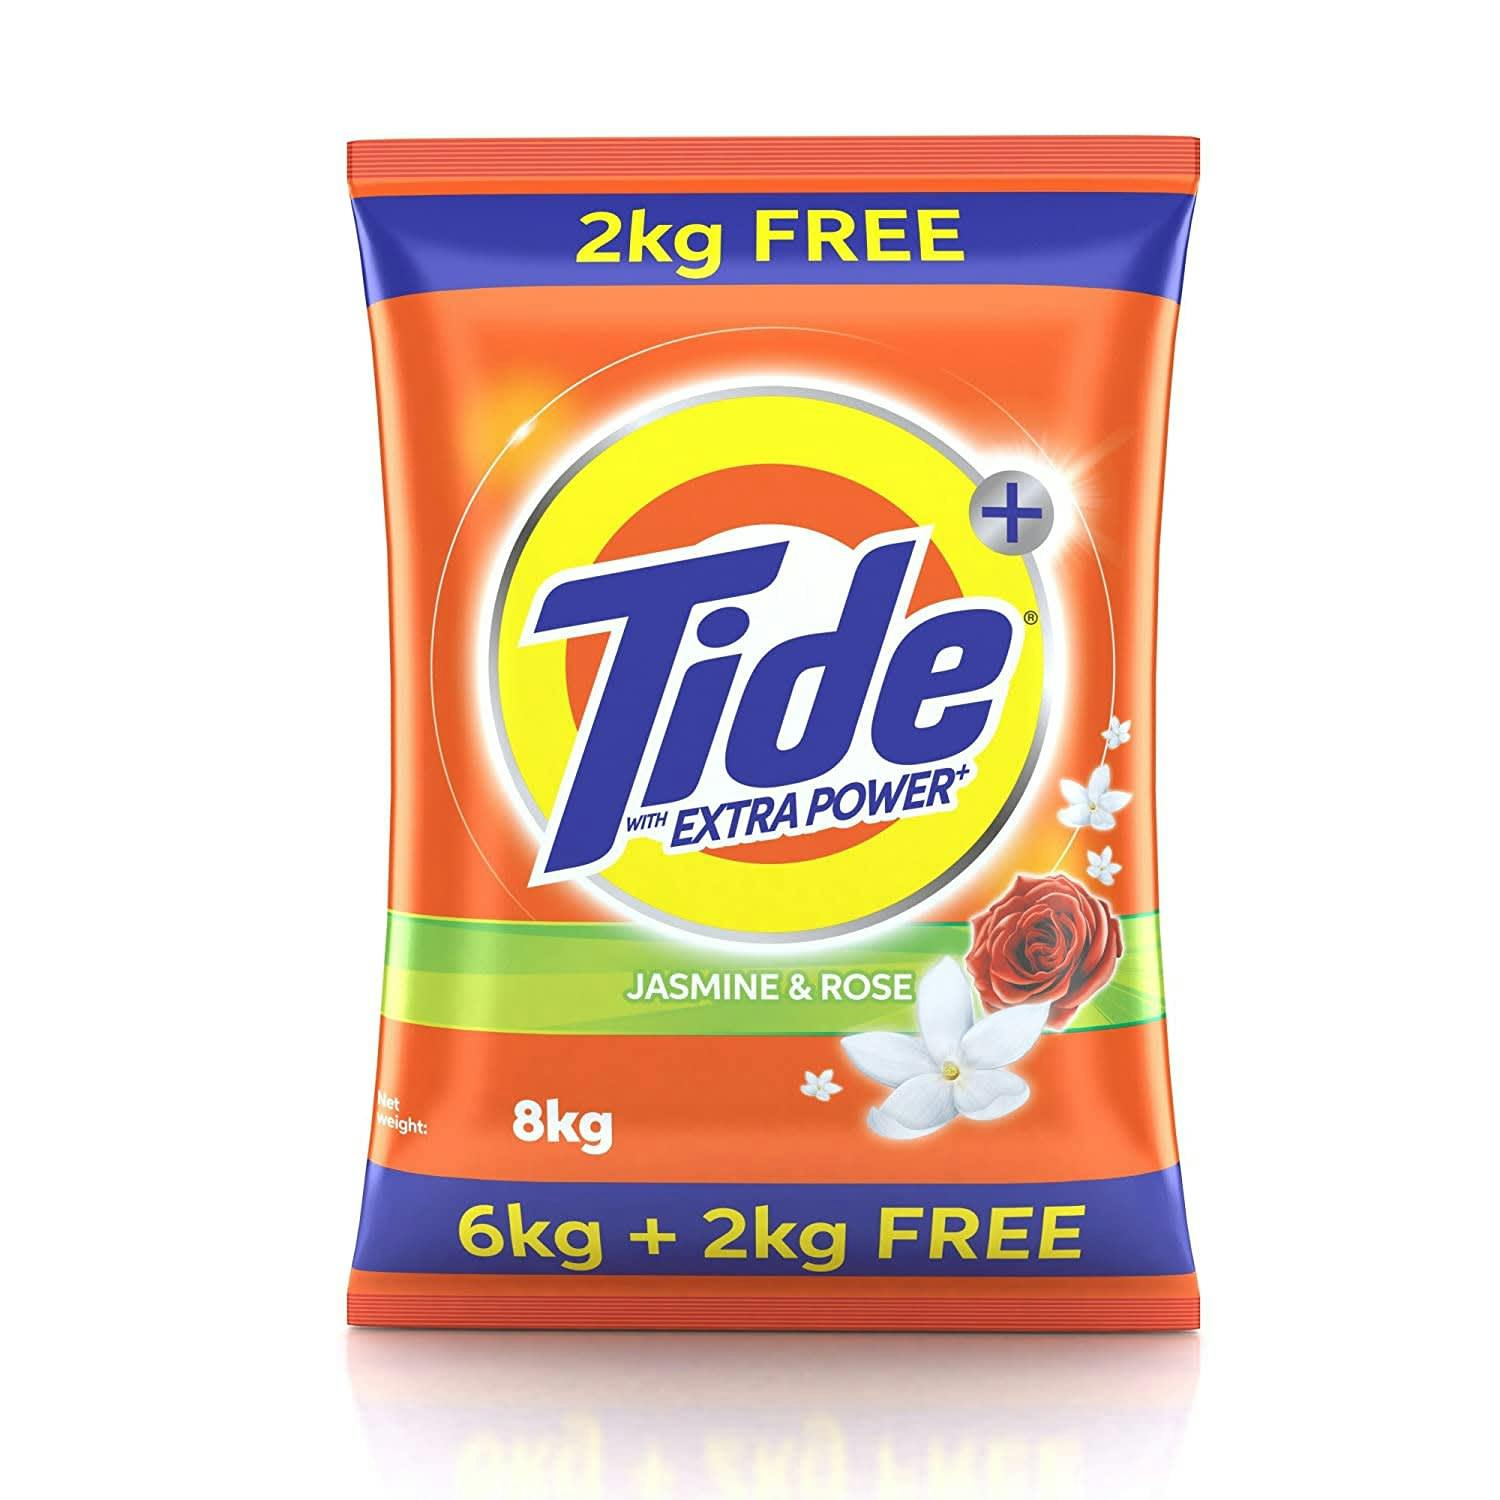 Tide Plus Extra Power Detergent Washing Powder 8KG at Rs 587 only